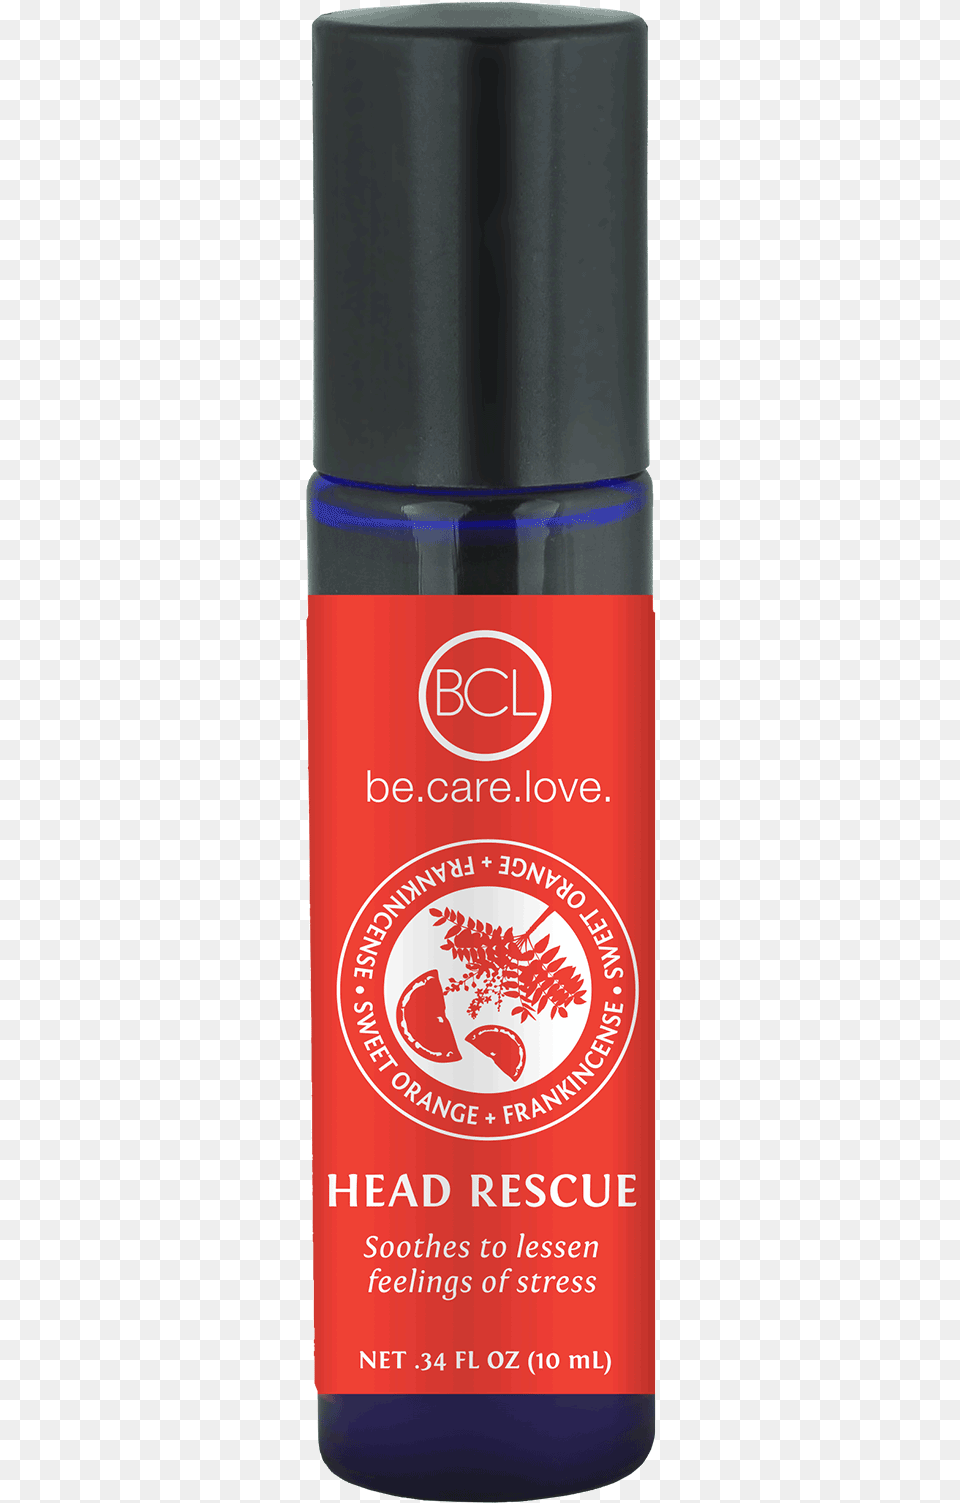 Head Rescue Essential Oil Roll On Blend Bcl Spa Head Rescue Essential Oil Roll On Blend, Cosmetics, Bottle, Deodorant, Can Png Image